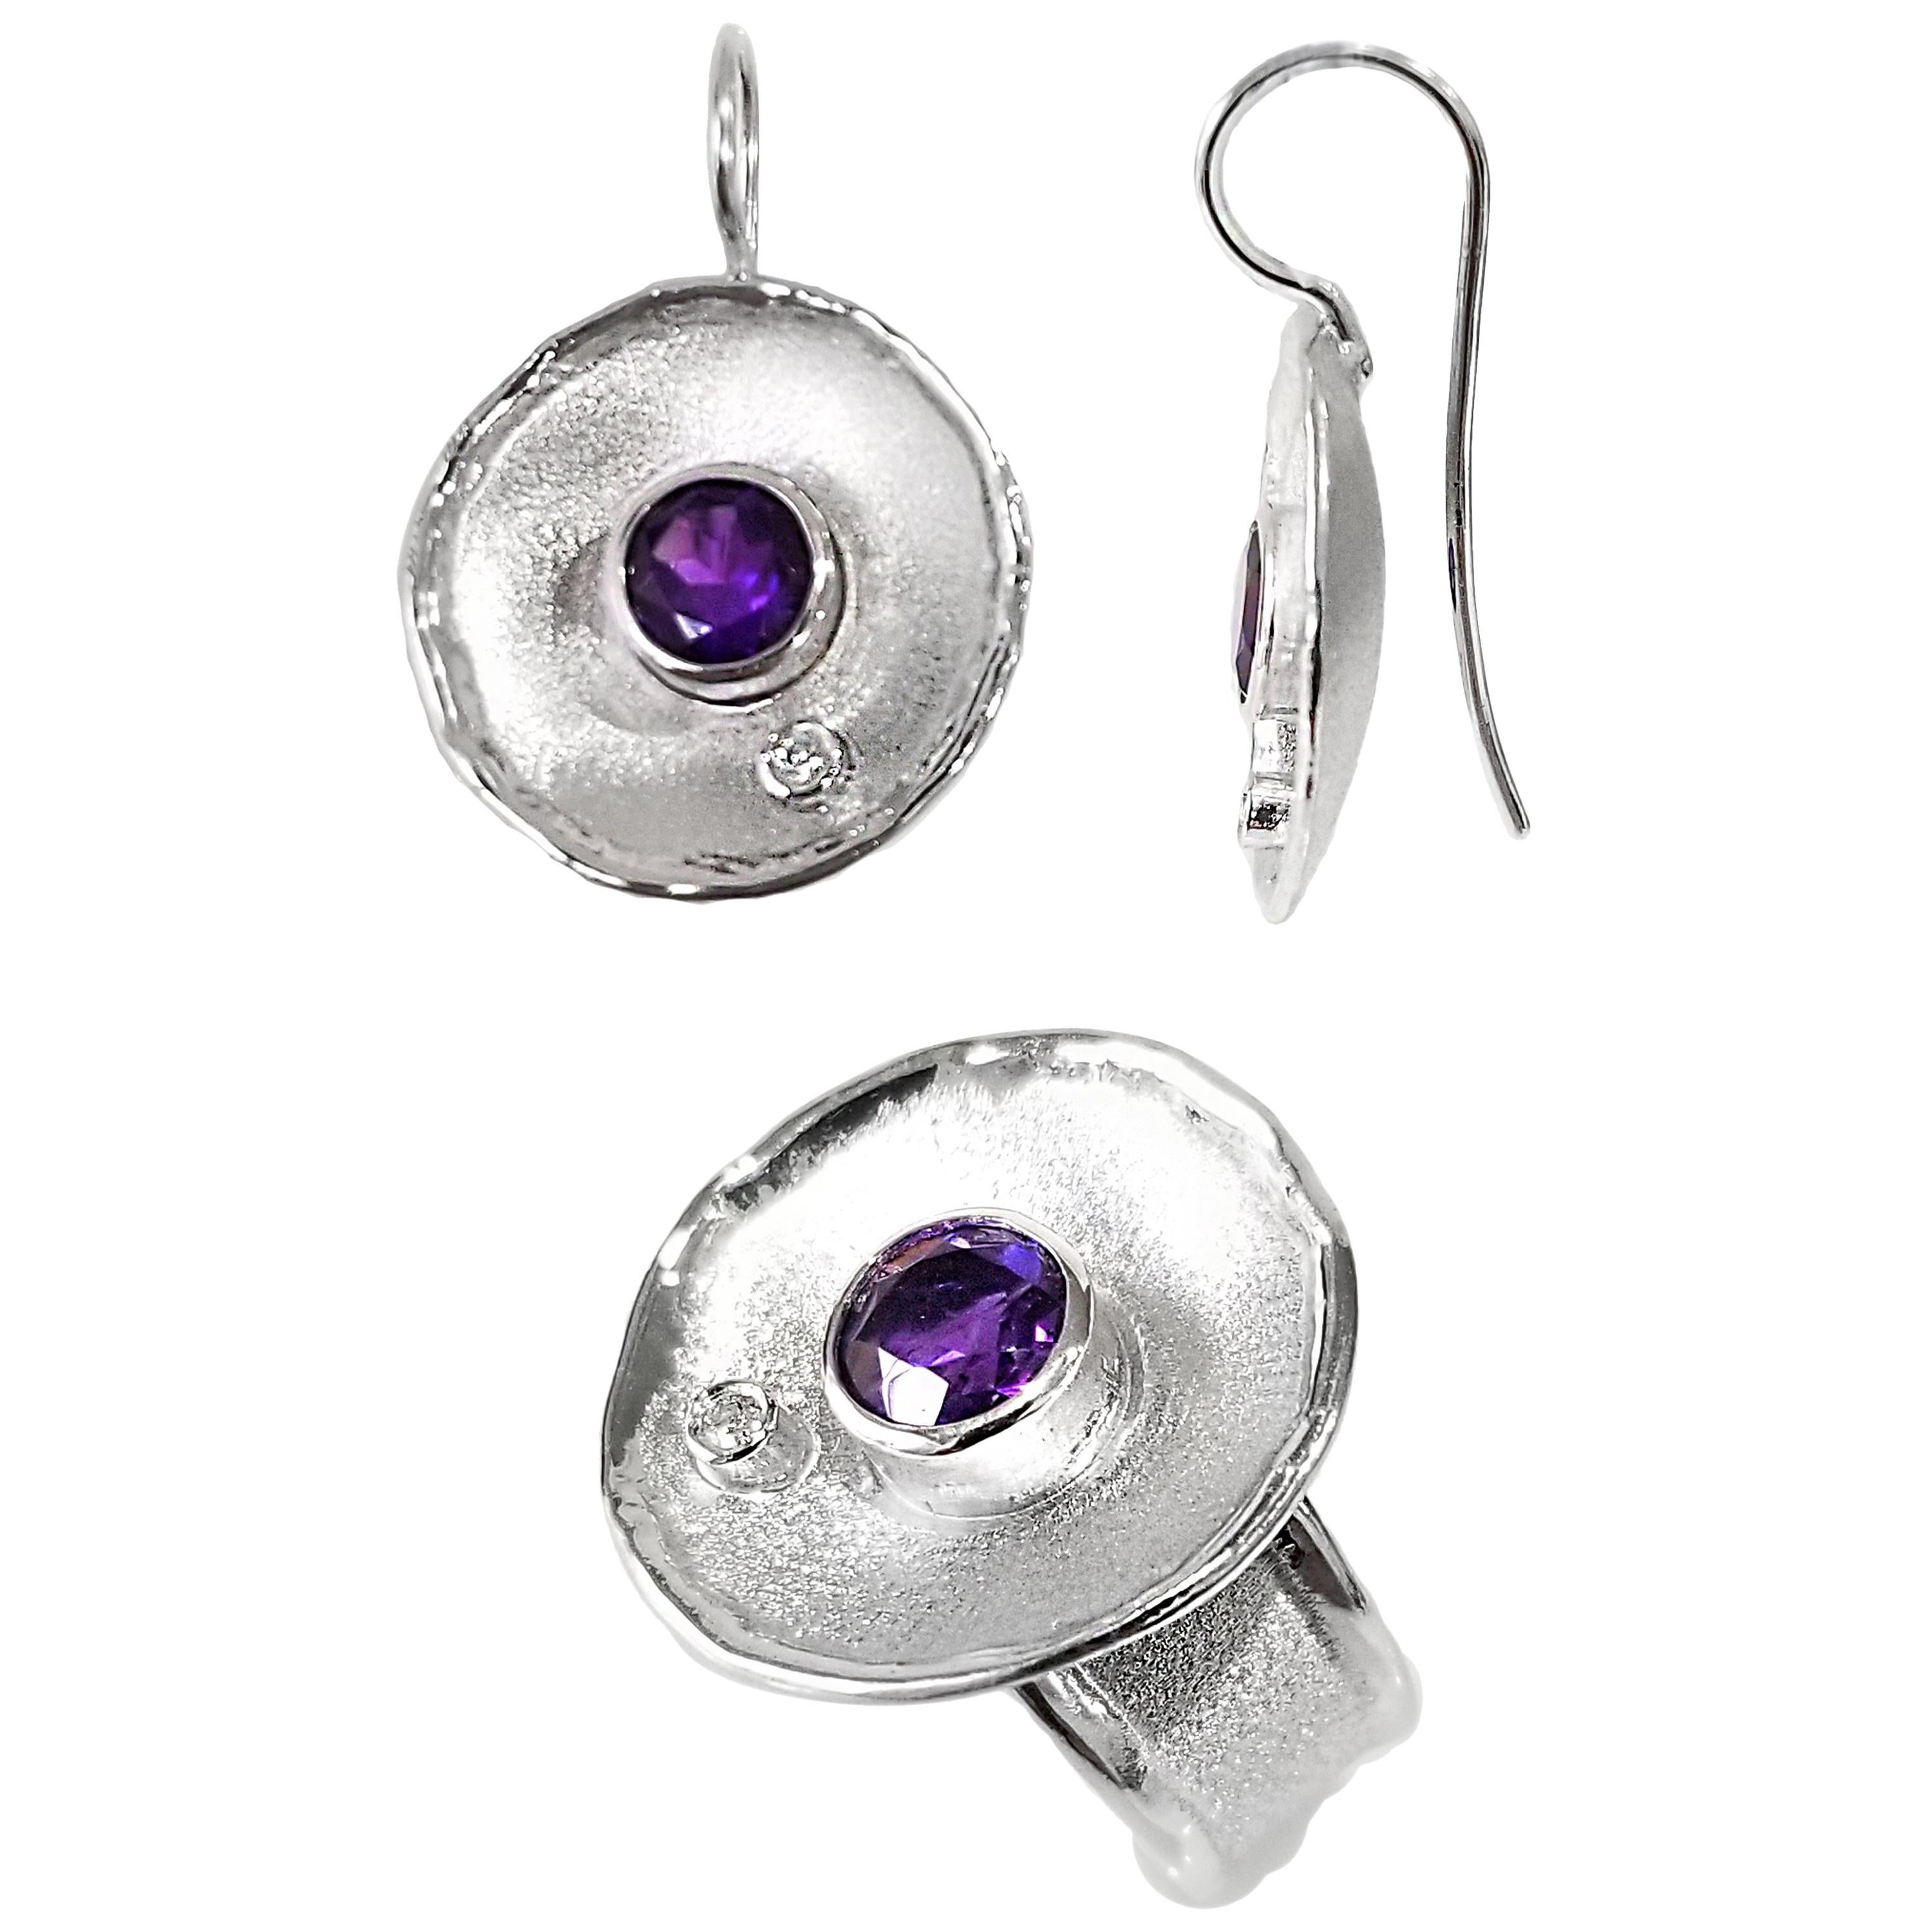 Yianni Creations 4.90 Carat Amethyst Diamond Set of Silver Earrings and Ring